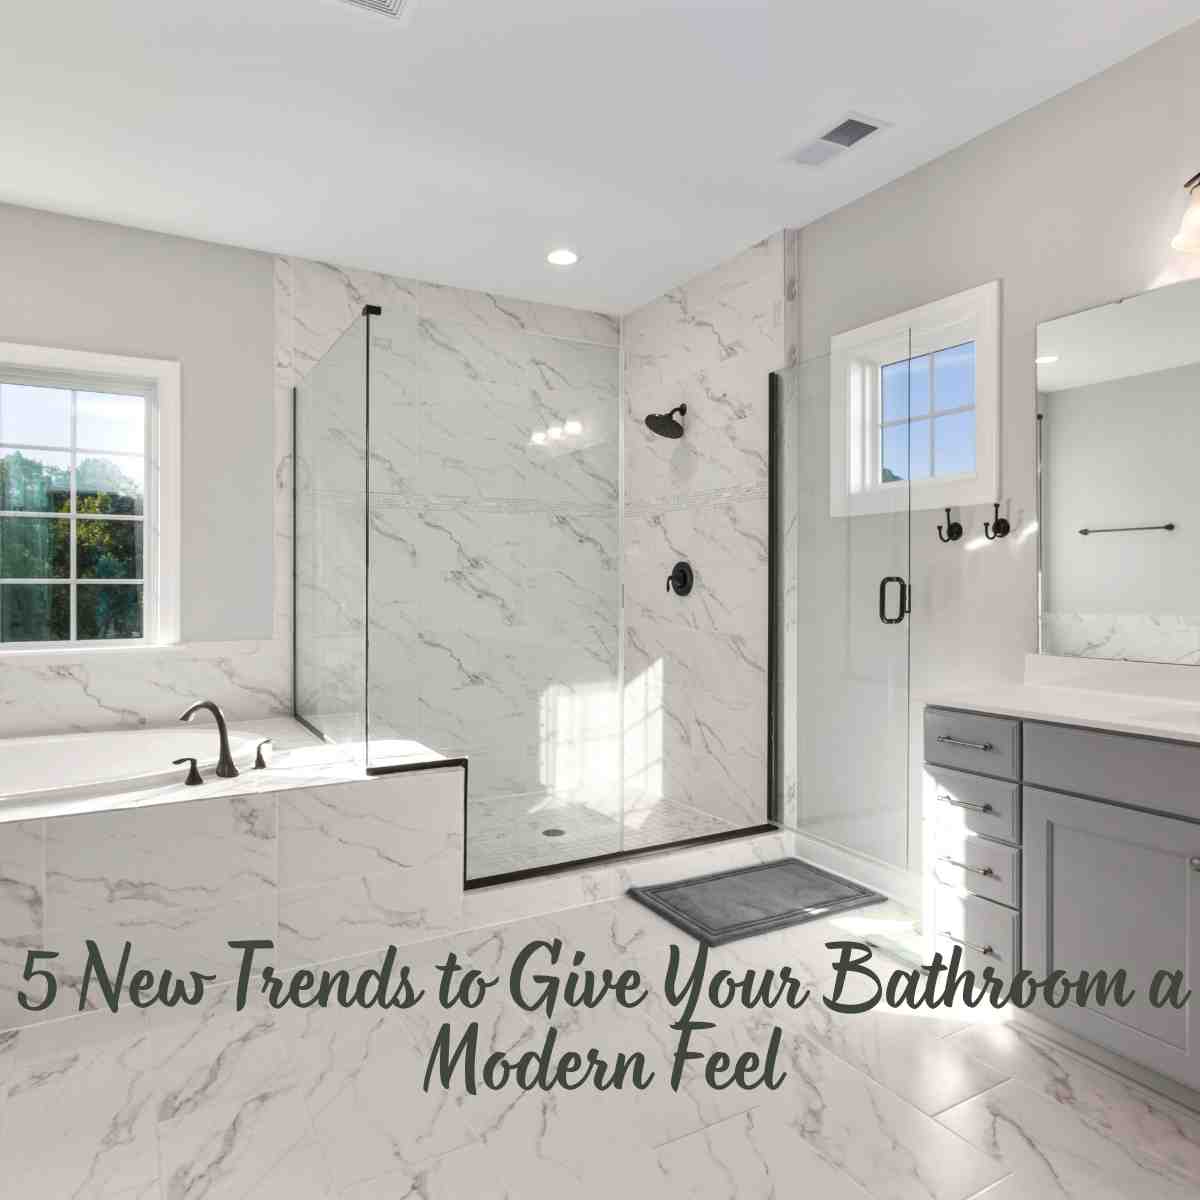 New Trends to Give Your Bathroom a Modern Feel